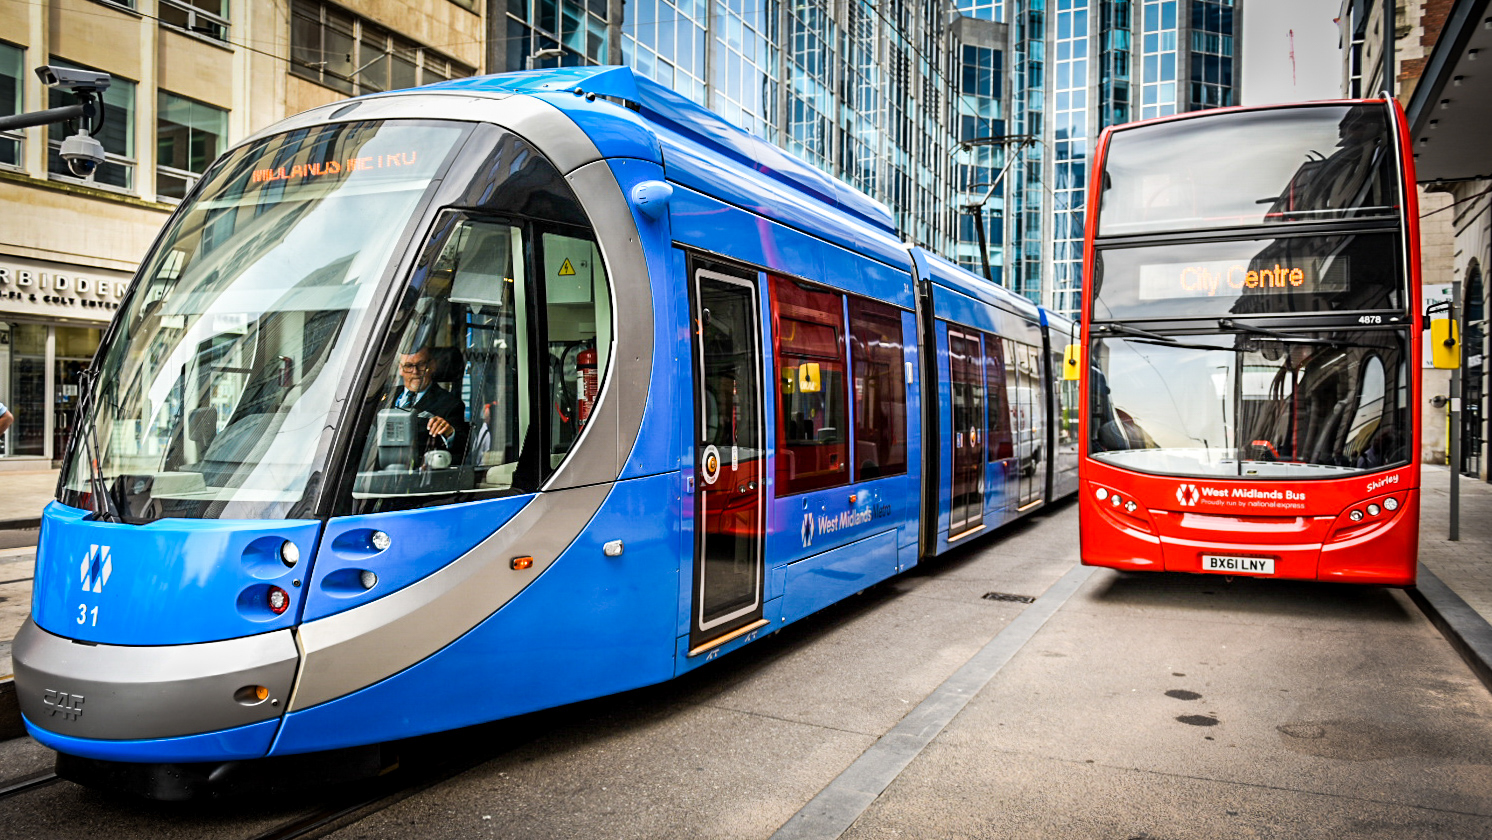 West Midlands secures over £1bn funding to drive a green transport revolution